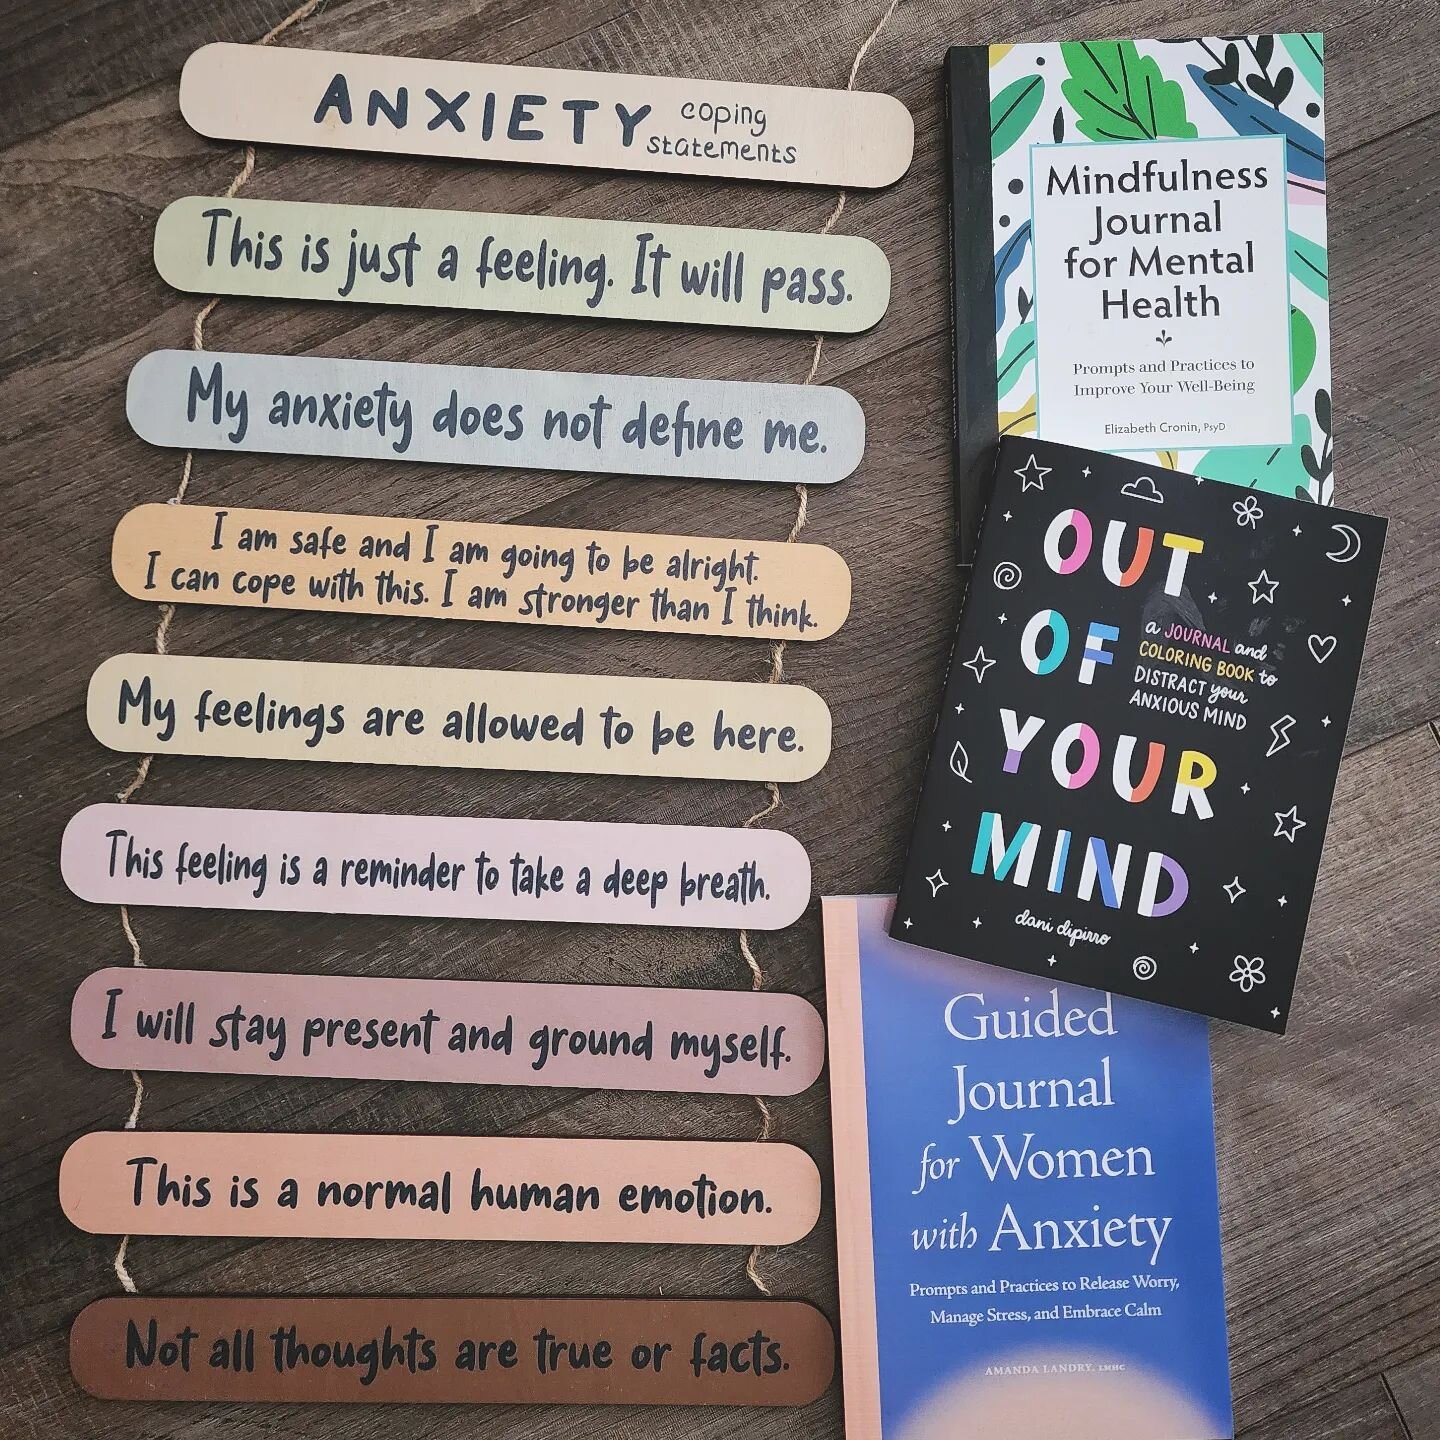 New goodies for my office! I love these guided journals and giving prompts to my clients because journaling has so many benefits!
1. Explores strengths, fears, symptoms, triggers &amp; coping strategies.
2. Improves self-esteem, cognitive processing,